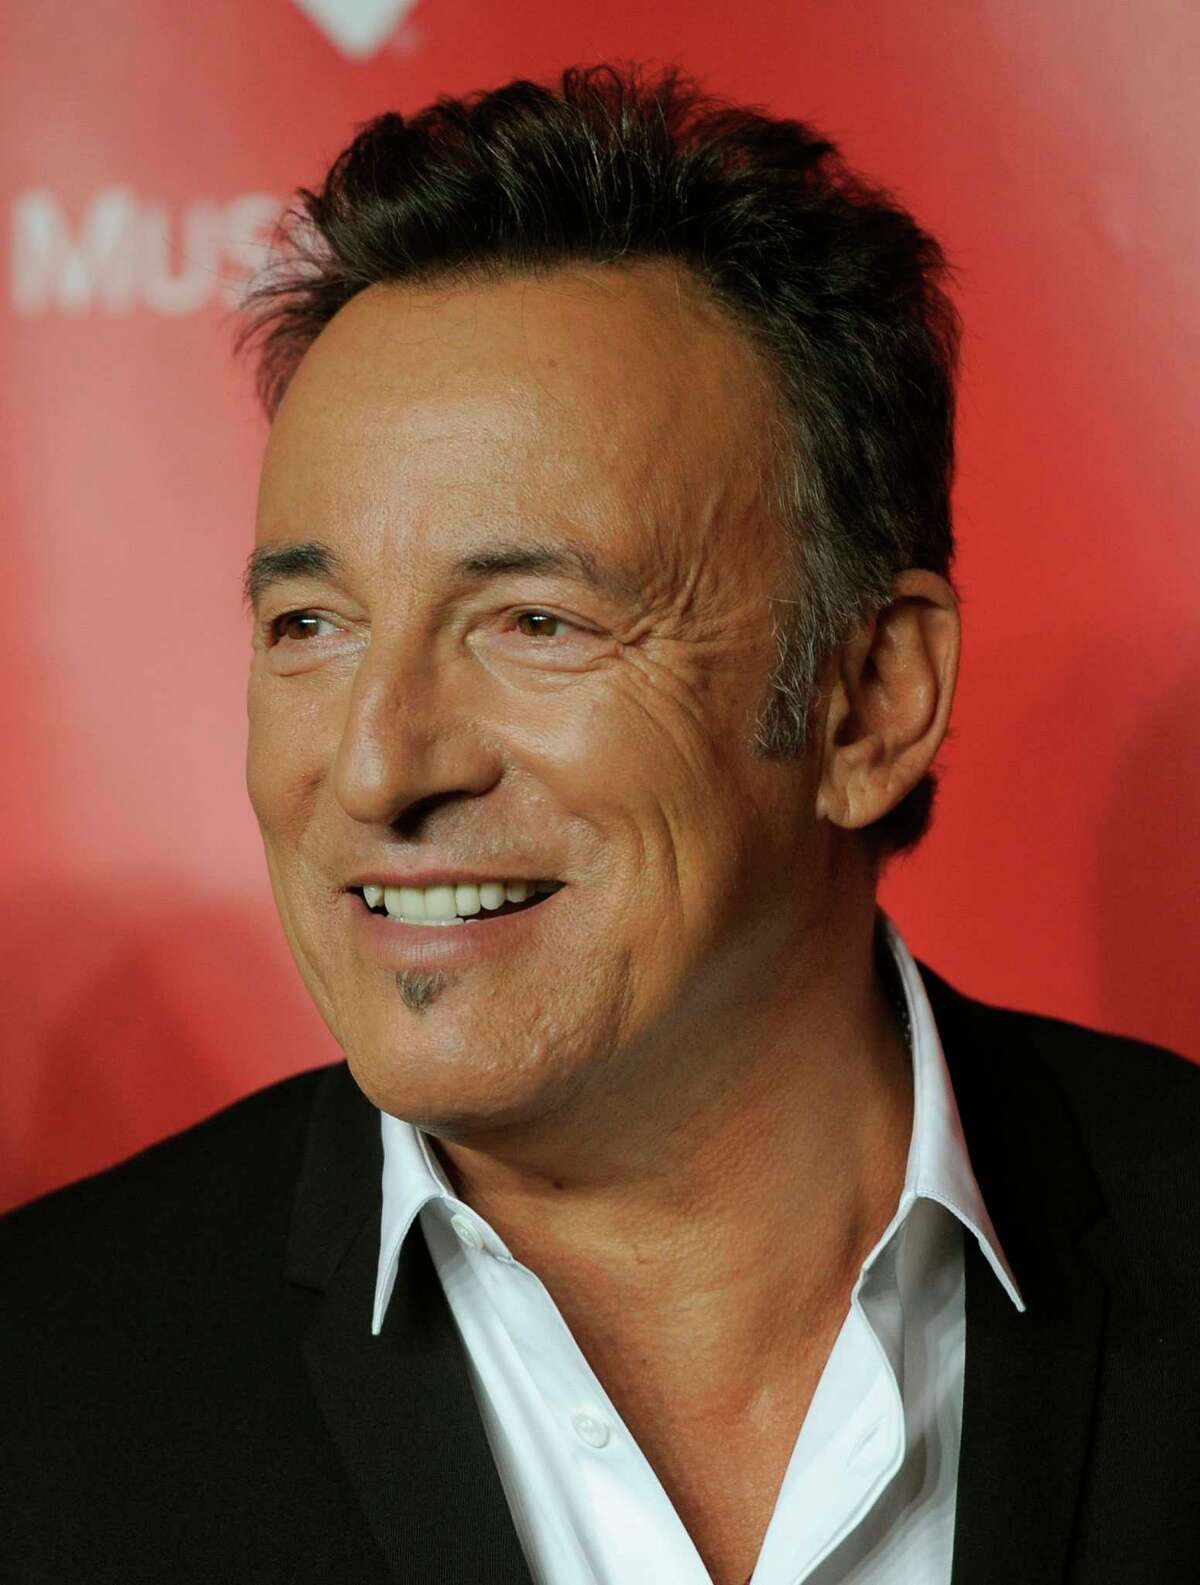 Honoree Bruce Springsteen arrives at his MusiCares Person of the Year tribute at the Los Angeles Convention Center on Friday Feb. 8, 2013, in Los Angeles. (Photo by Chris Pizzello/Invision/AP)